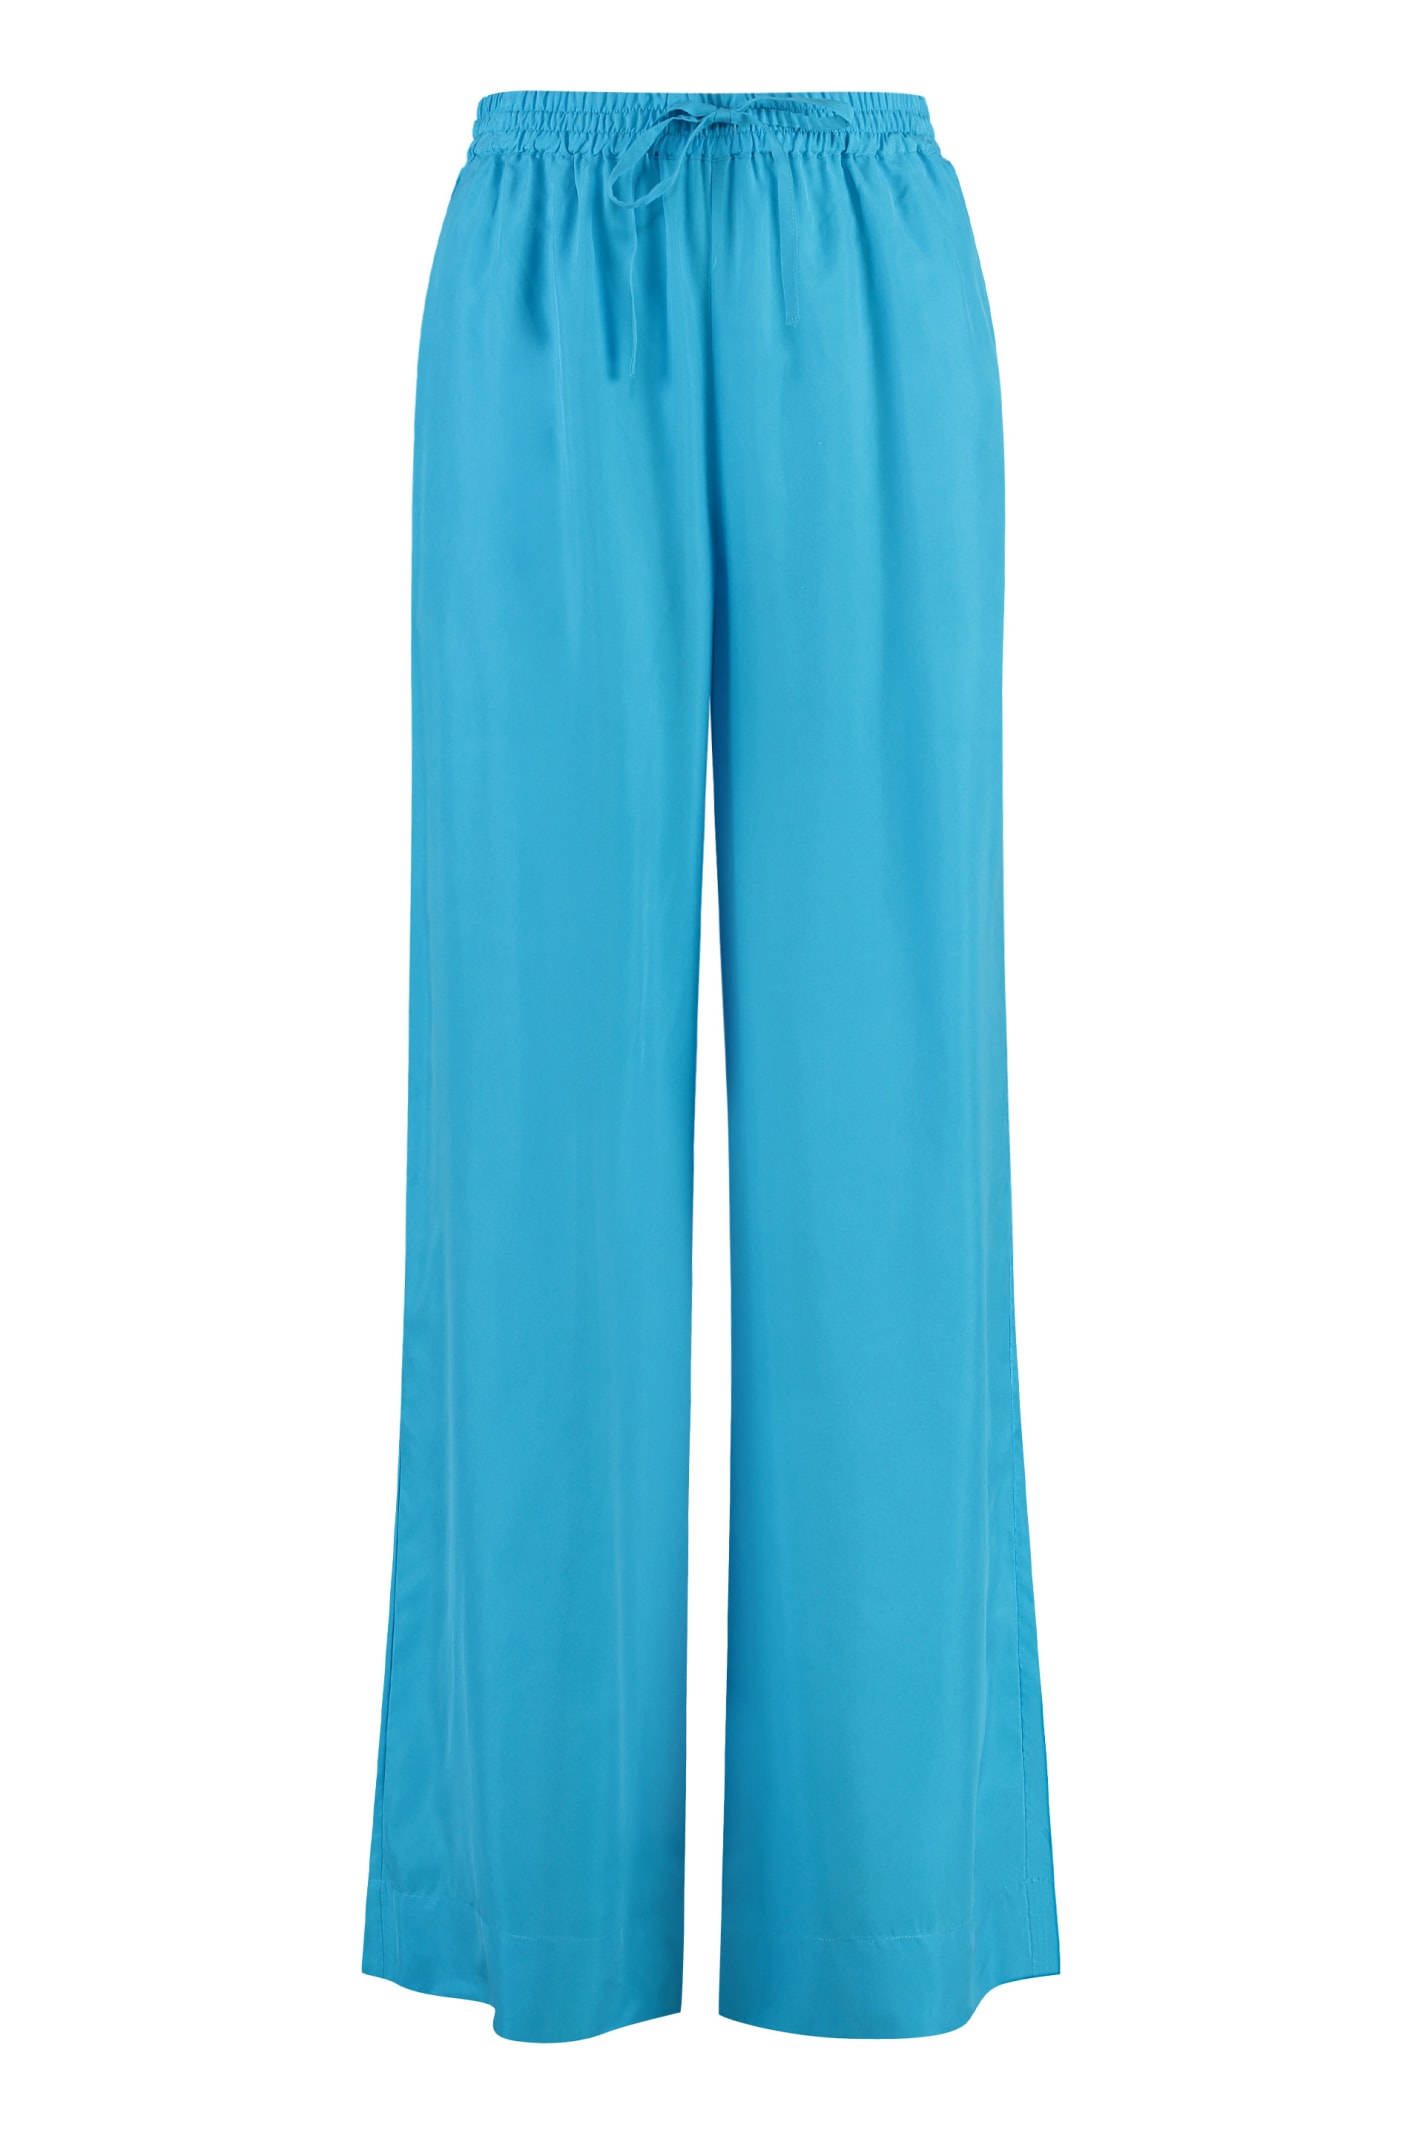 P.a.r.o.s.h Silk Maxi Skirt In Turquoise